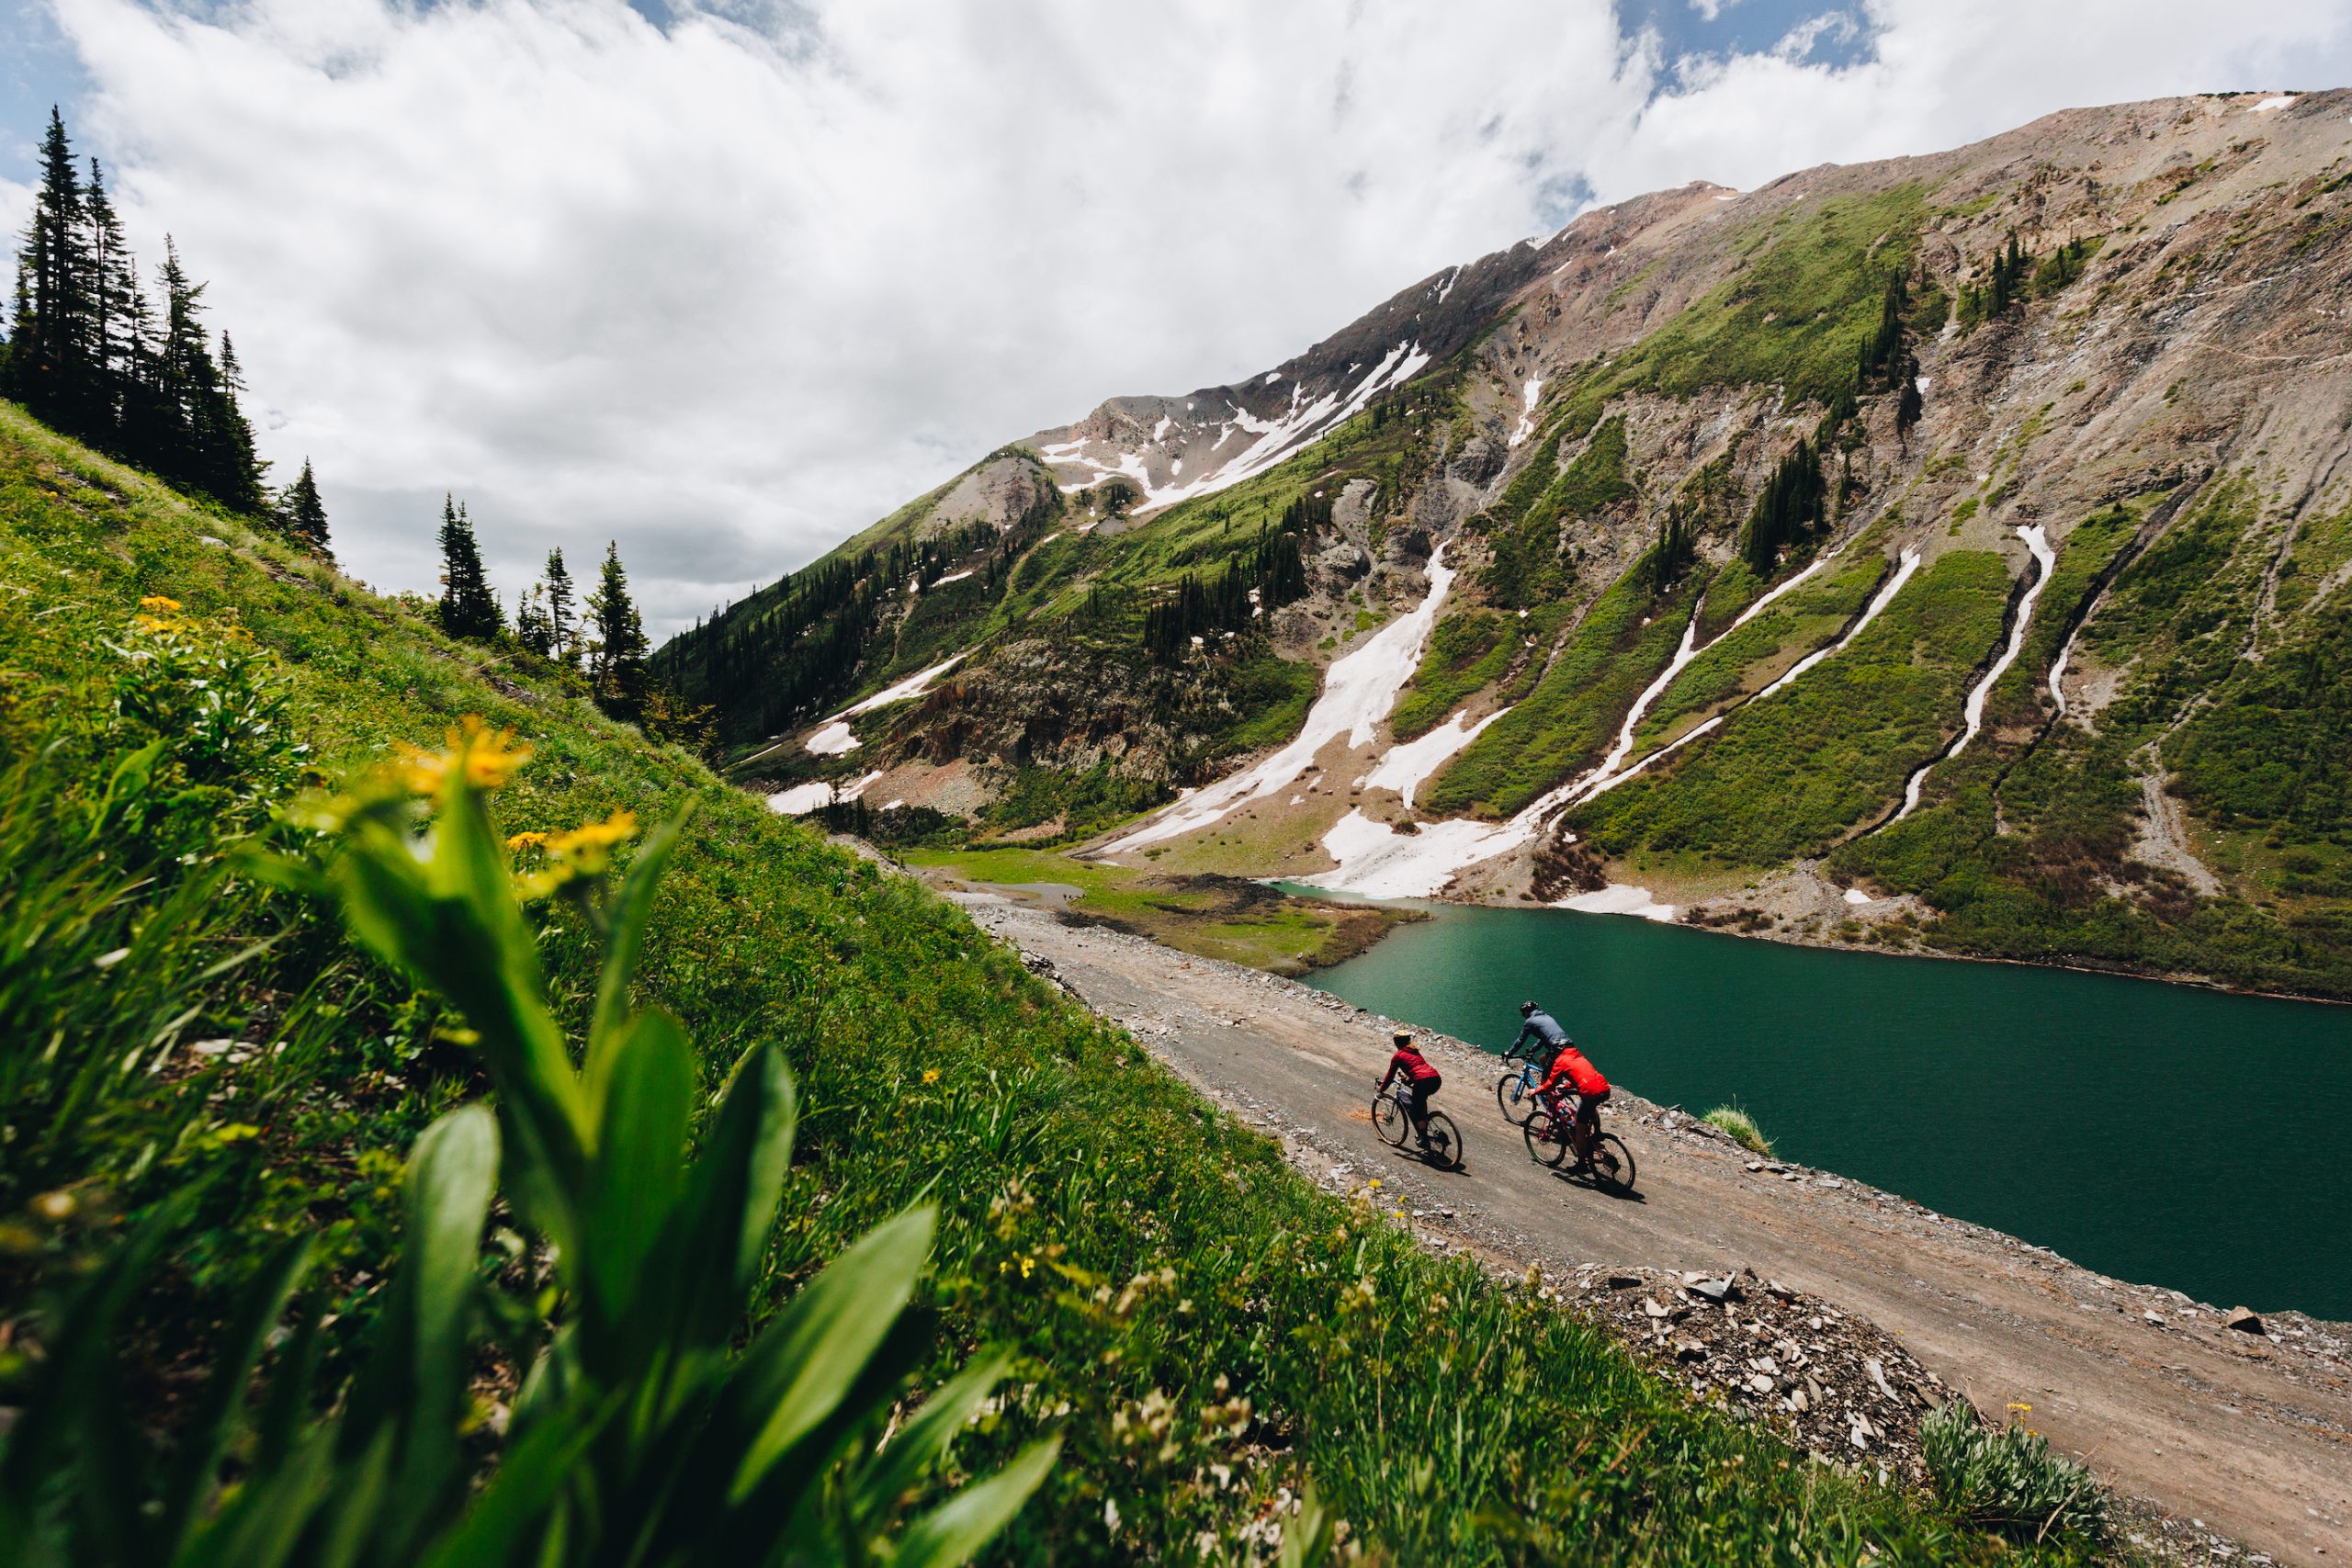 Three people ride bikes on a dirt road next to a lake